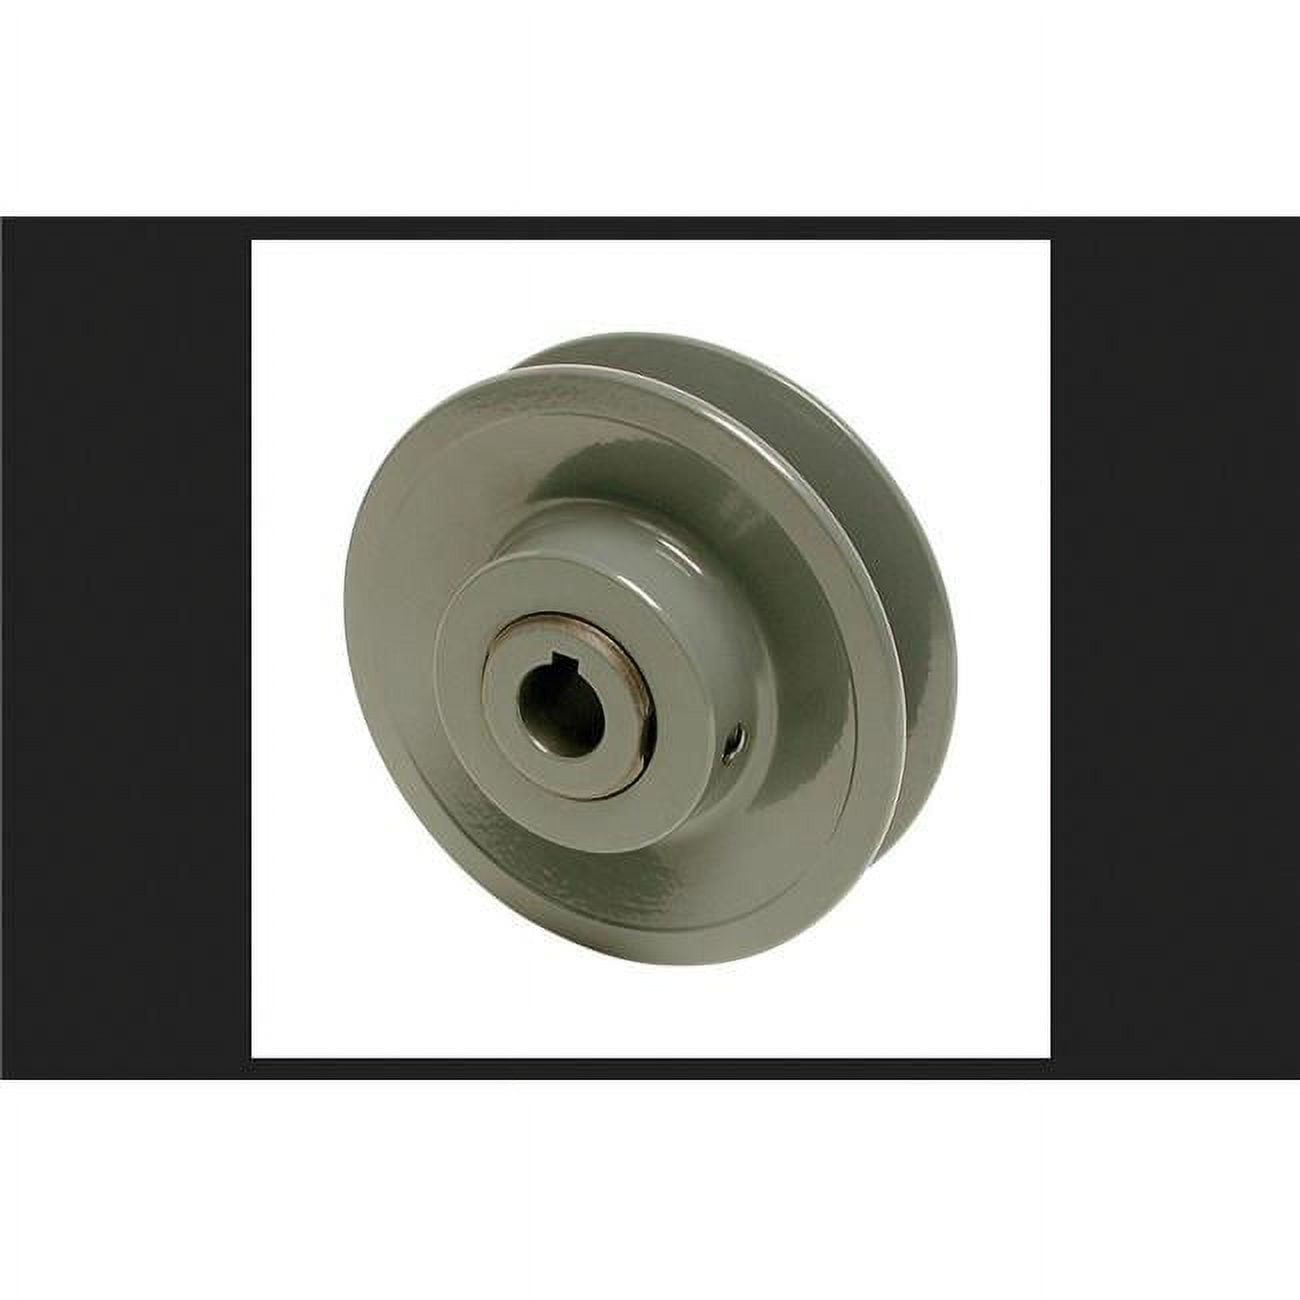 3.75 X 0.5 In. Plastic Iron Pulley